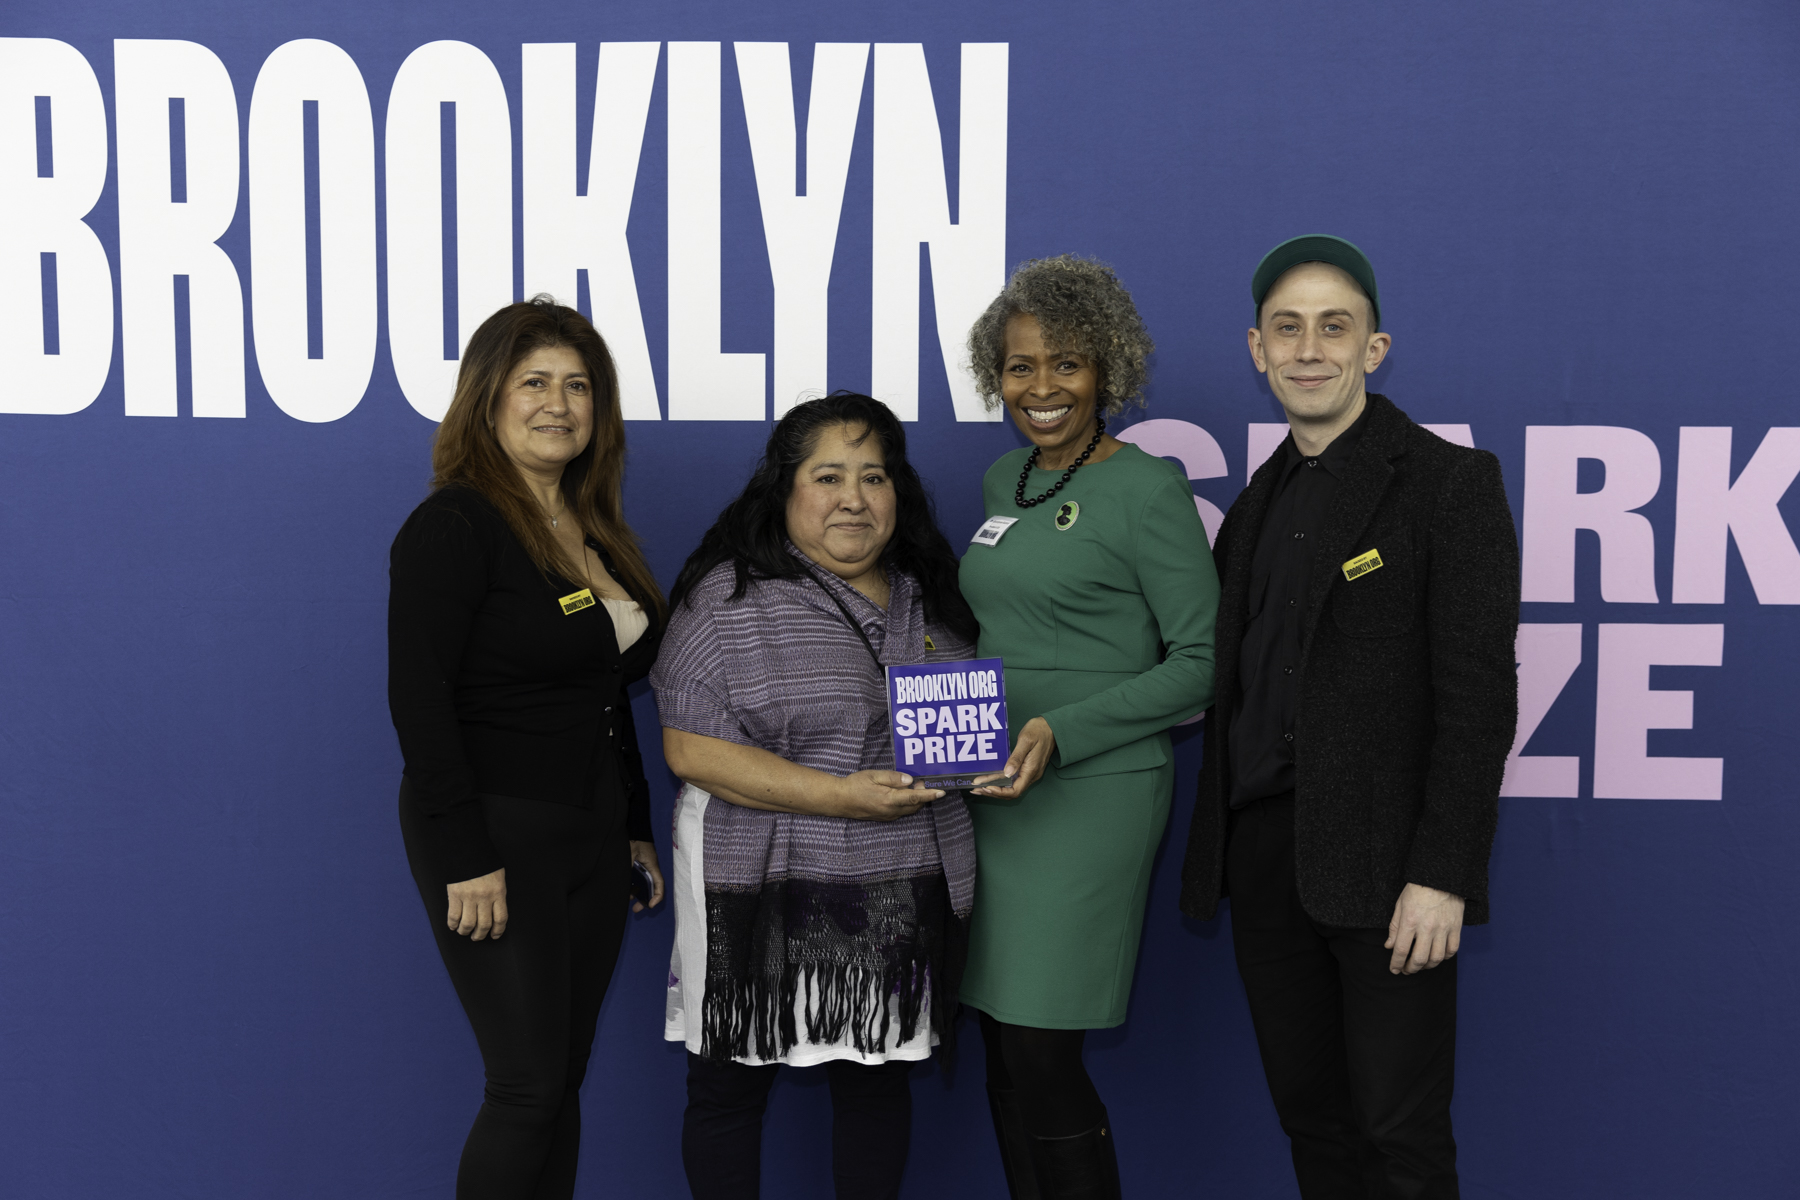 Four individuals posing together in front of a sign that reads "brooklyn" with one holding an award titled "spark prize.